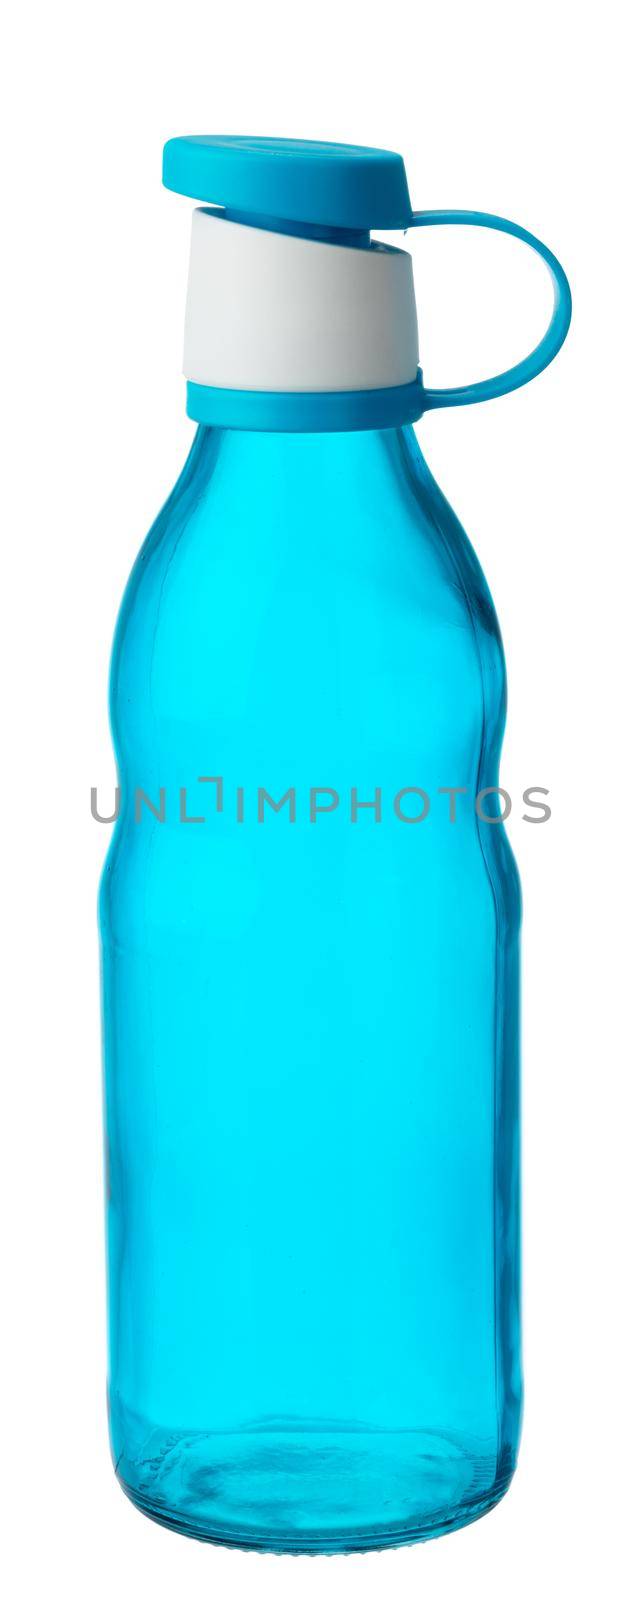 Empty plastic bottle for drinks isolated on white by Fabrikasimf